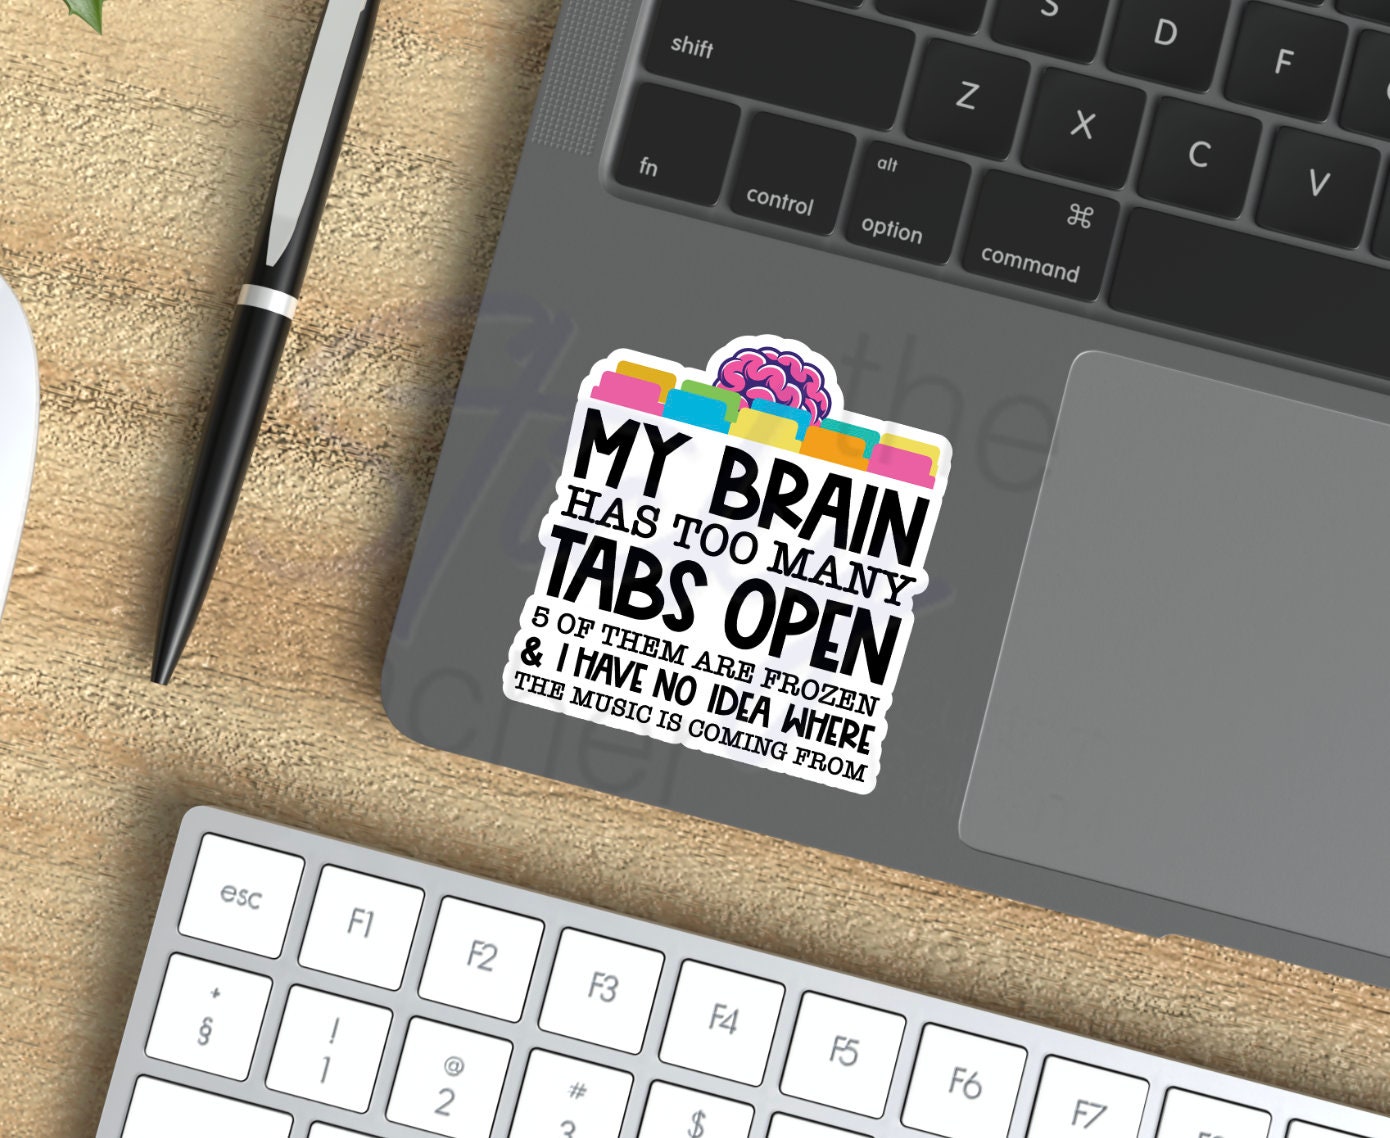 My brain has too many tabs open Sticker, Water Bottle Decal Funny Vinyl Decals, funny mom gift stickers, Water Bottle Decal, Teacher Gift